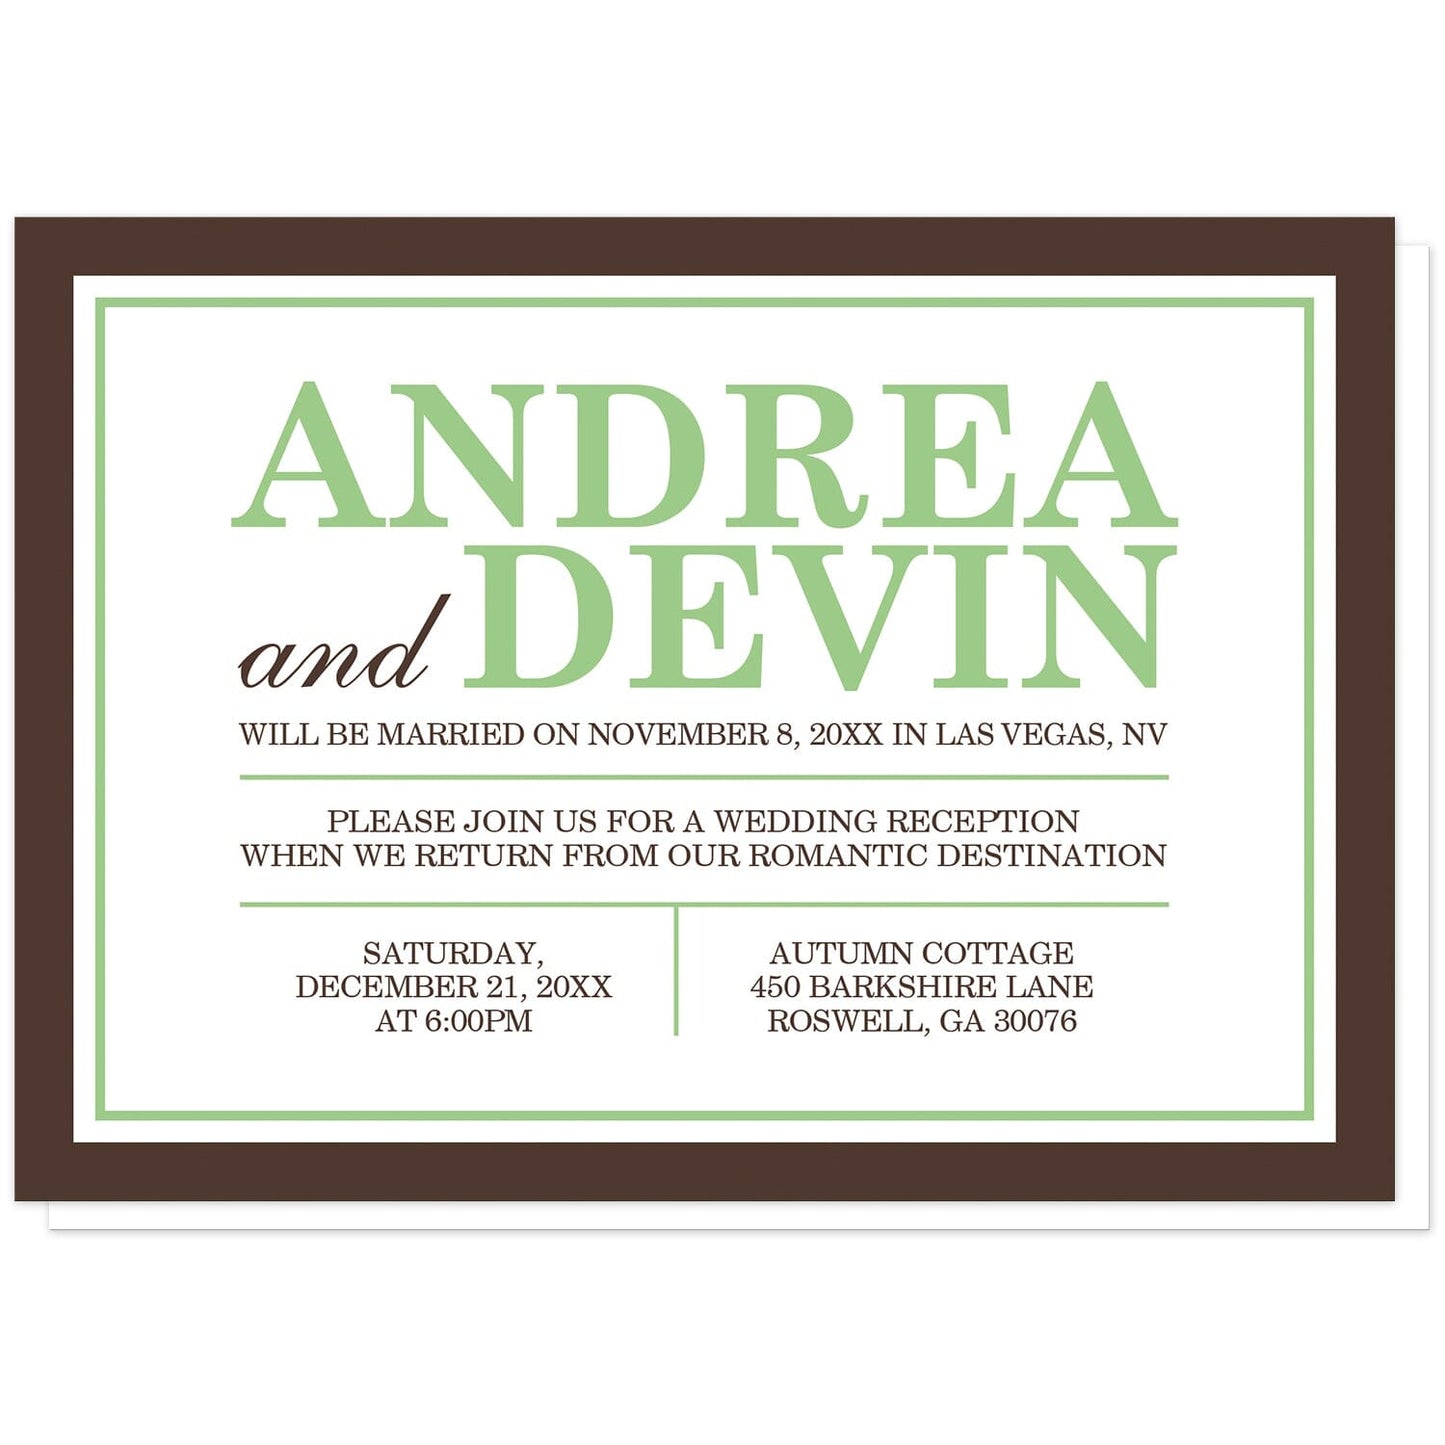 Green and Brown Reception Only Invitations at Artistically Invited. Green and brown reception only invitations with a simple modern minimalist green and brown typography design and border.